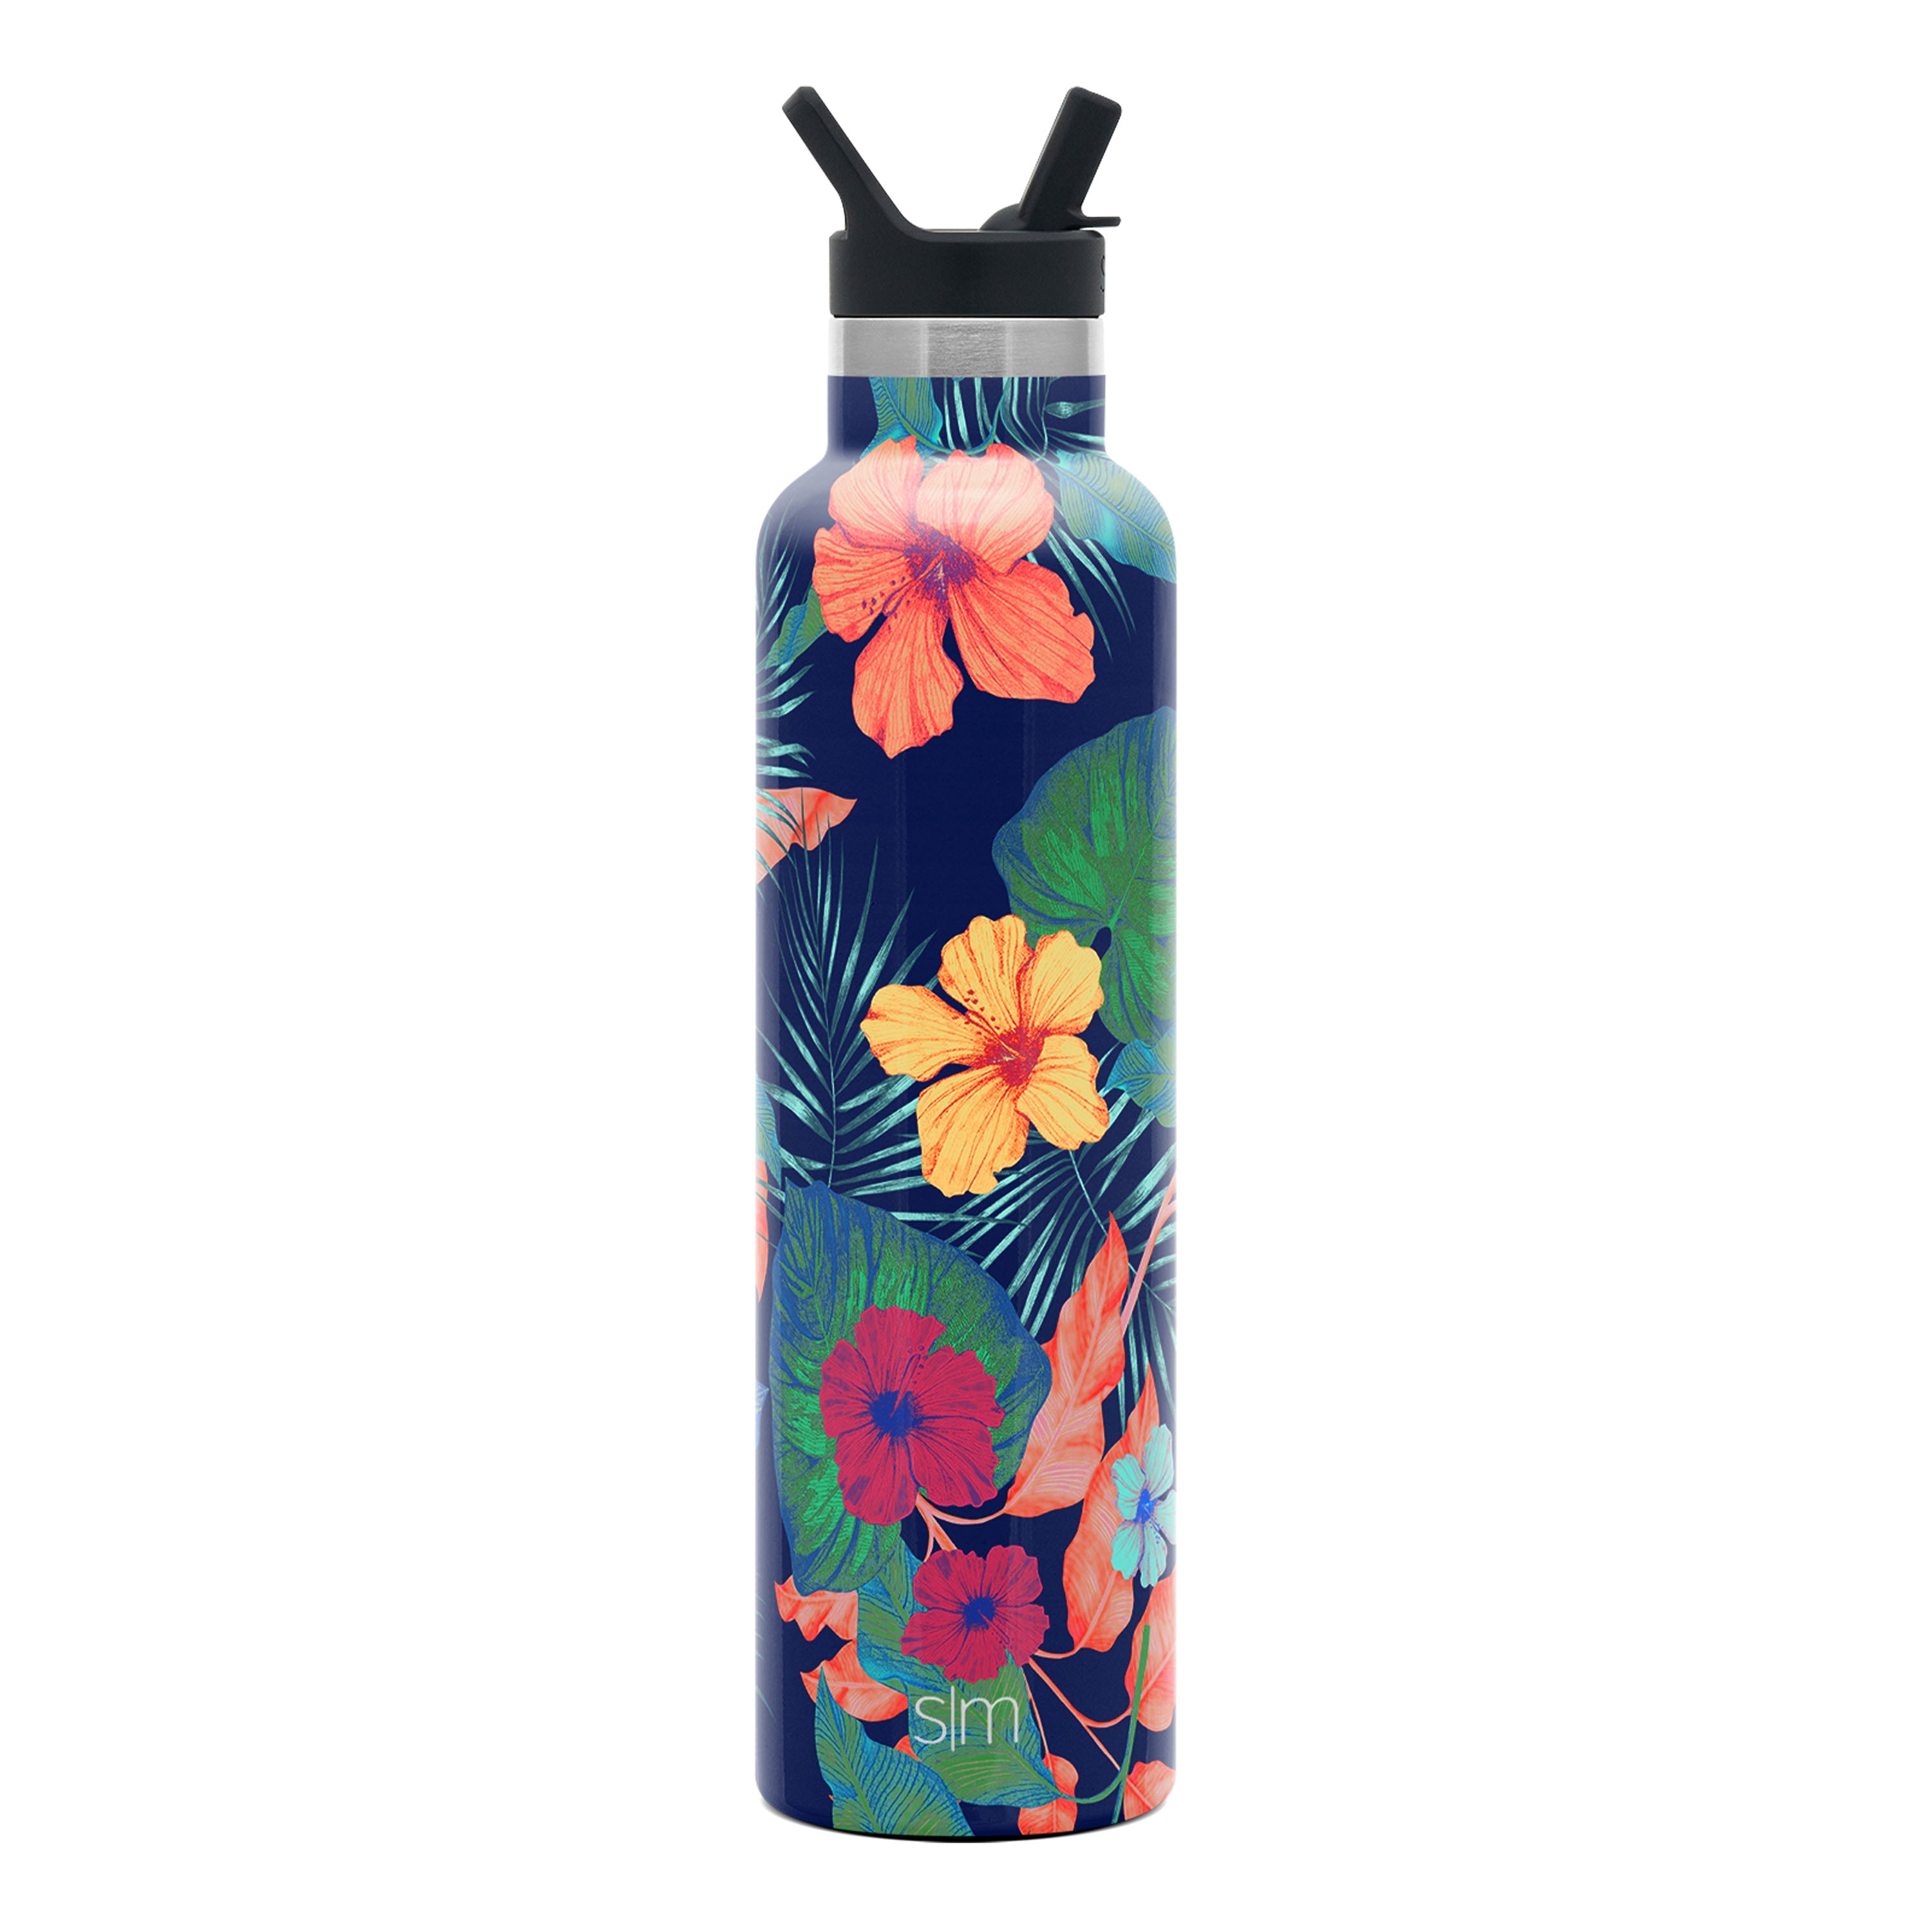 Simple Modern Ascent Water Bottle - Narrow Mouth, Vacuum Insulated